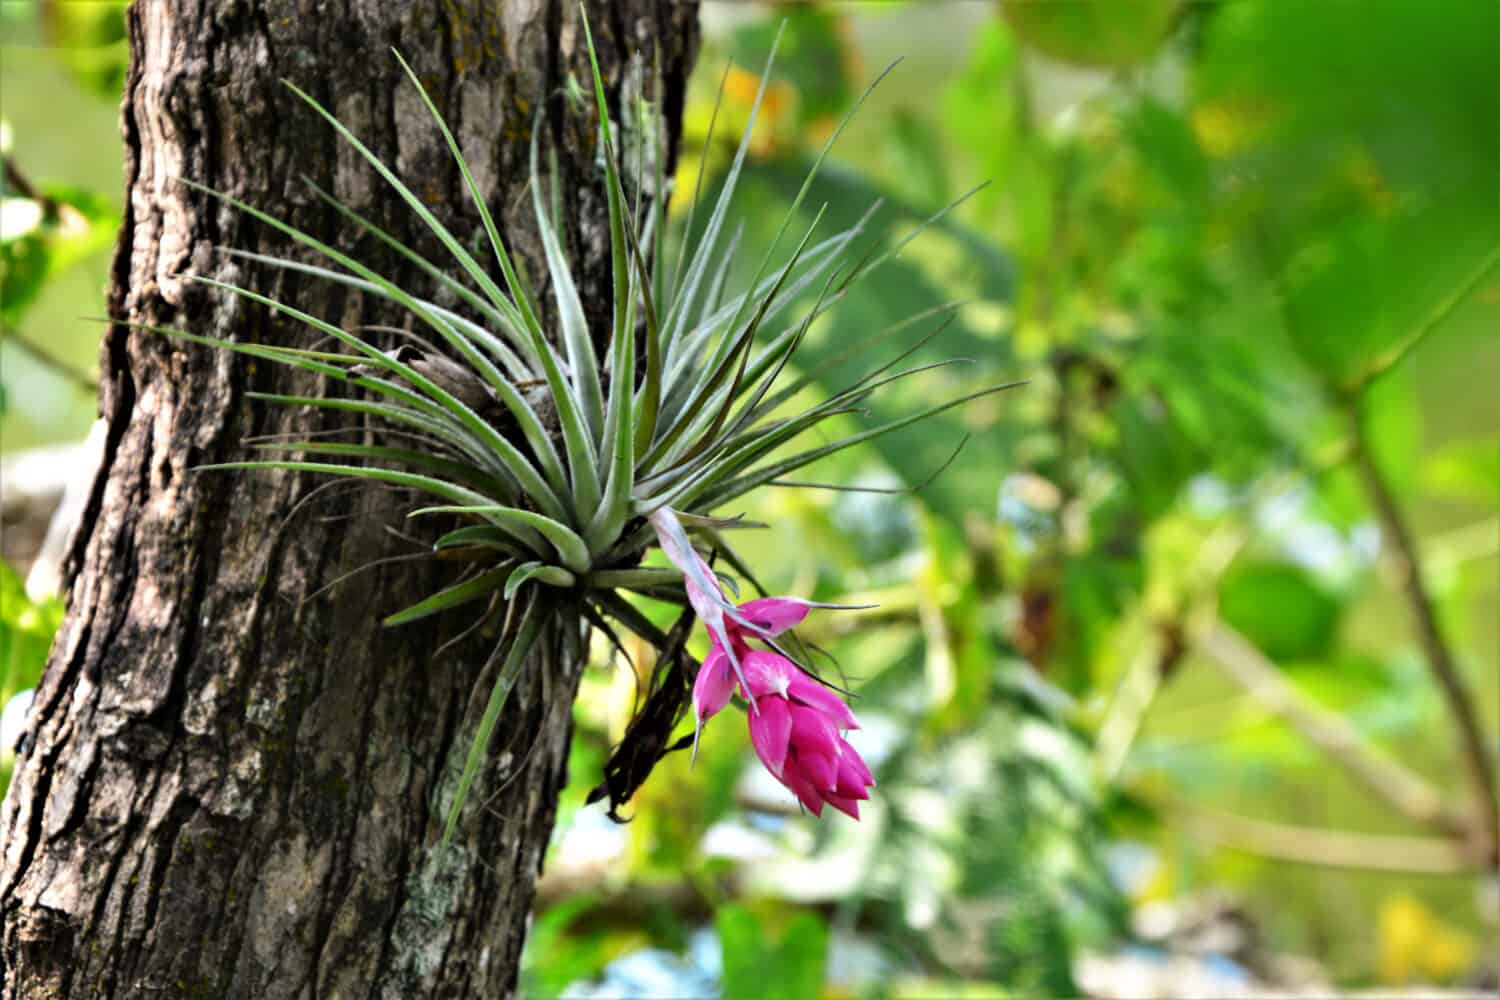 A Tillandsia stricta on the tree trunk